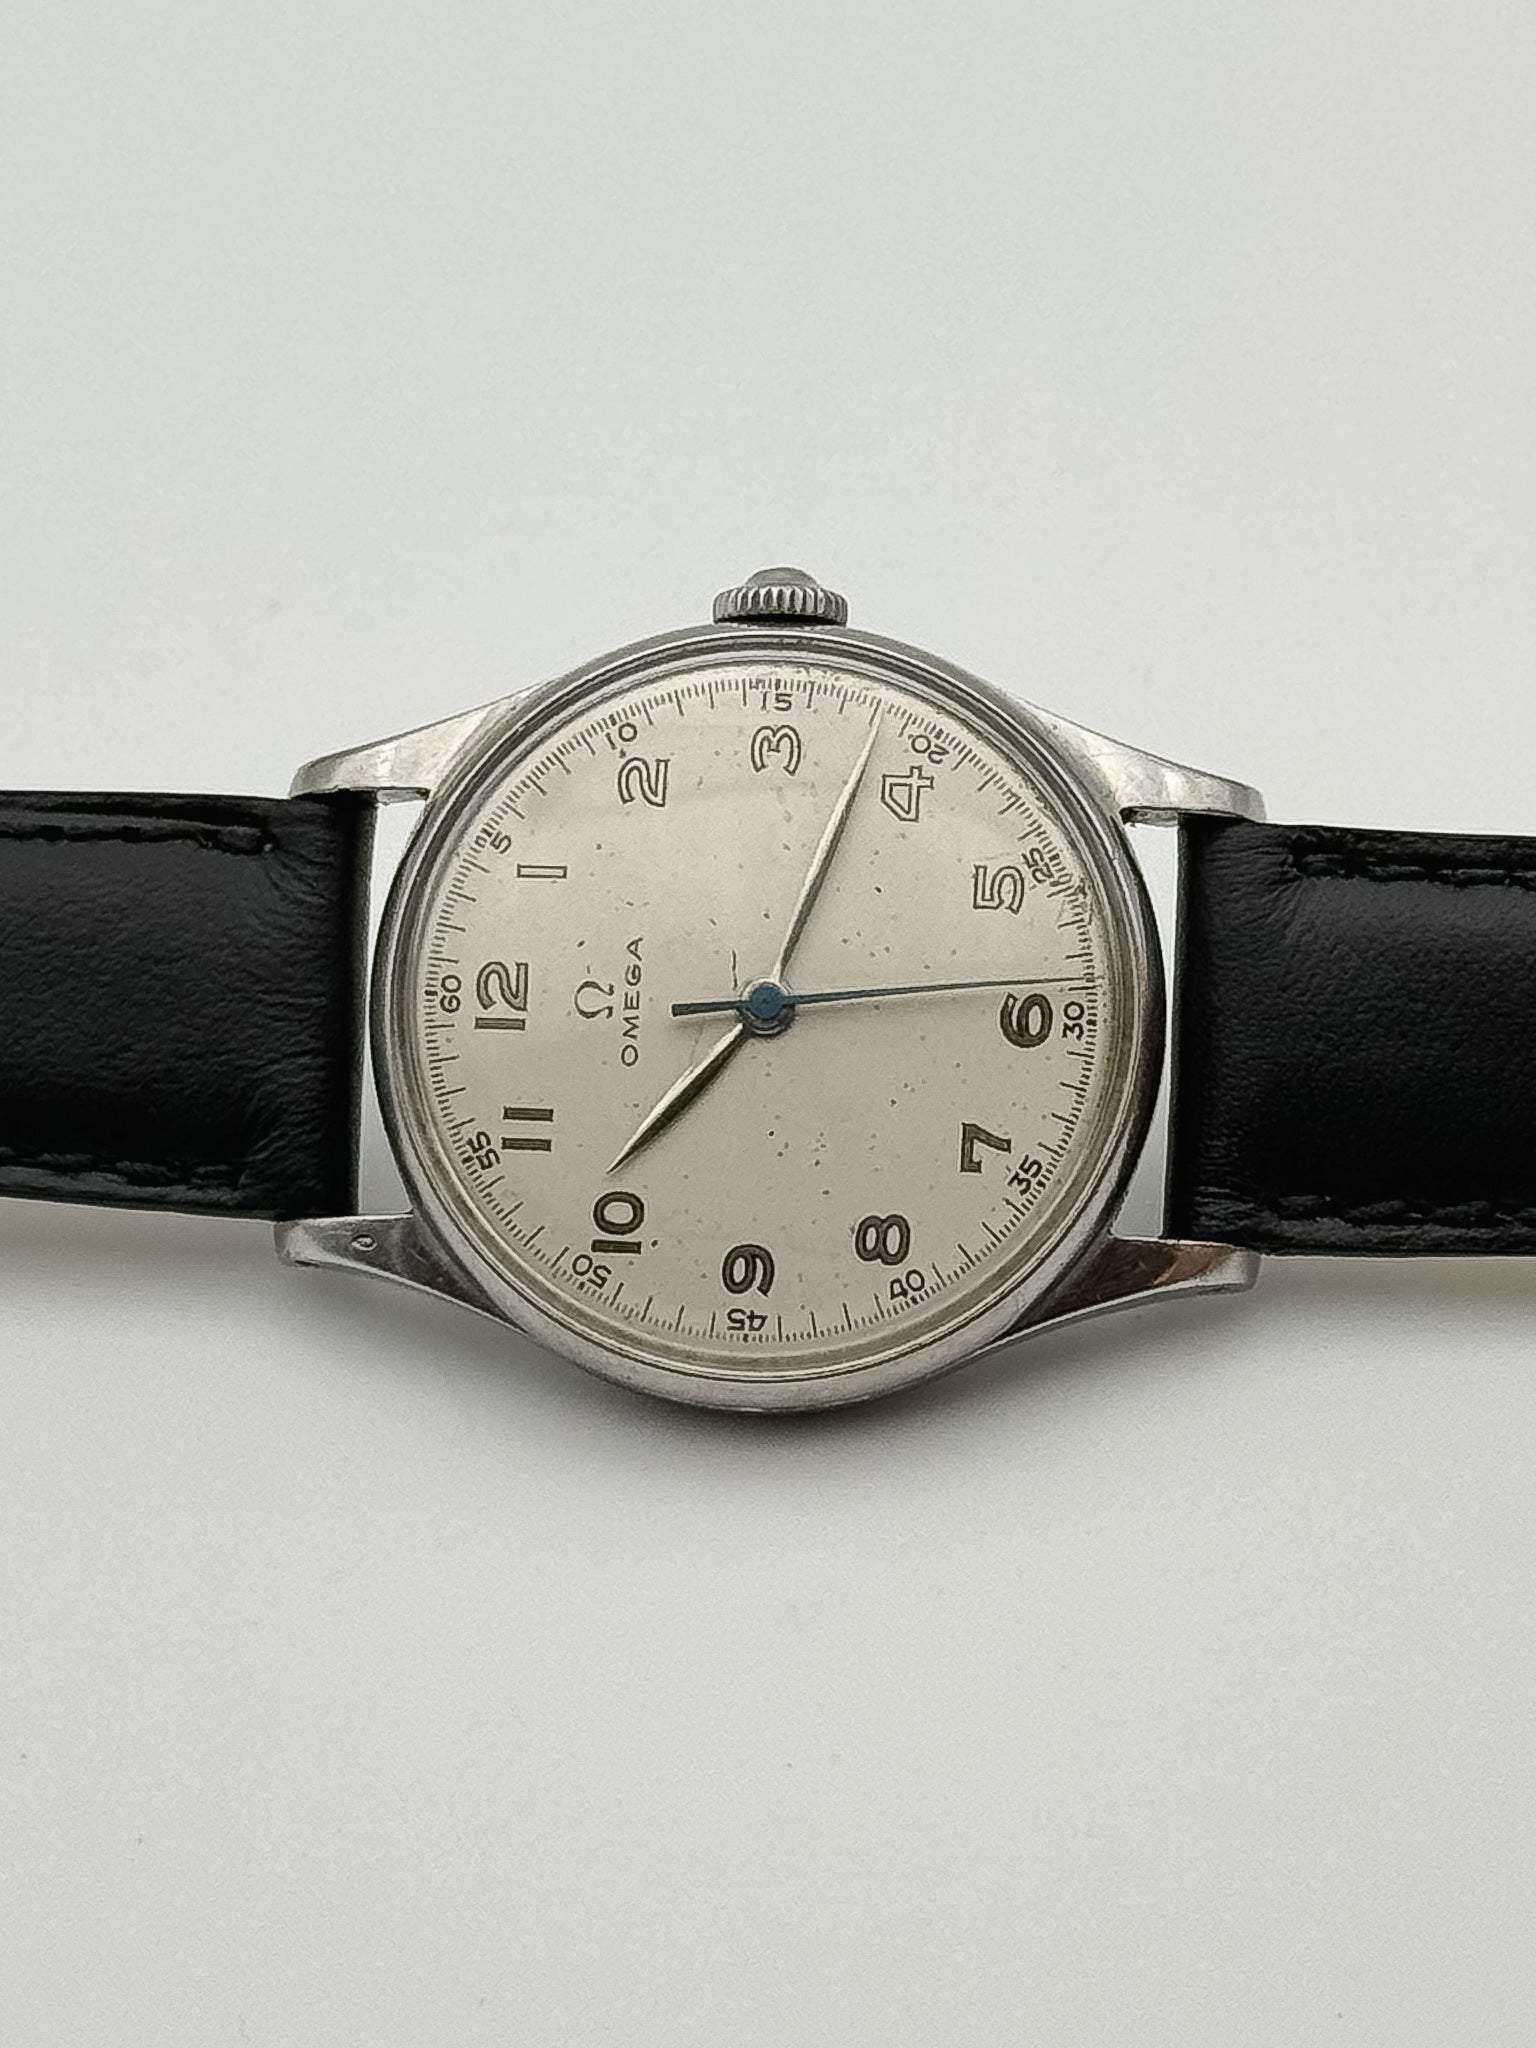 Omega - Military WW2 - 1944 - Atelier Victor